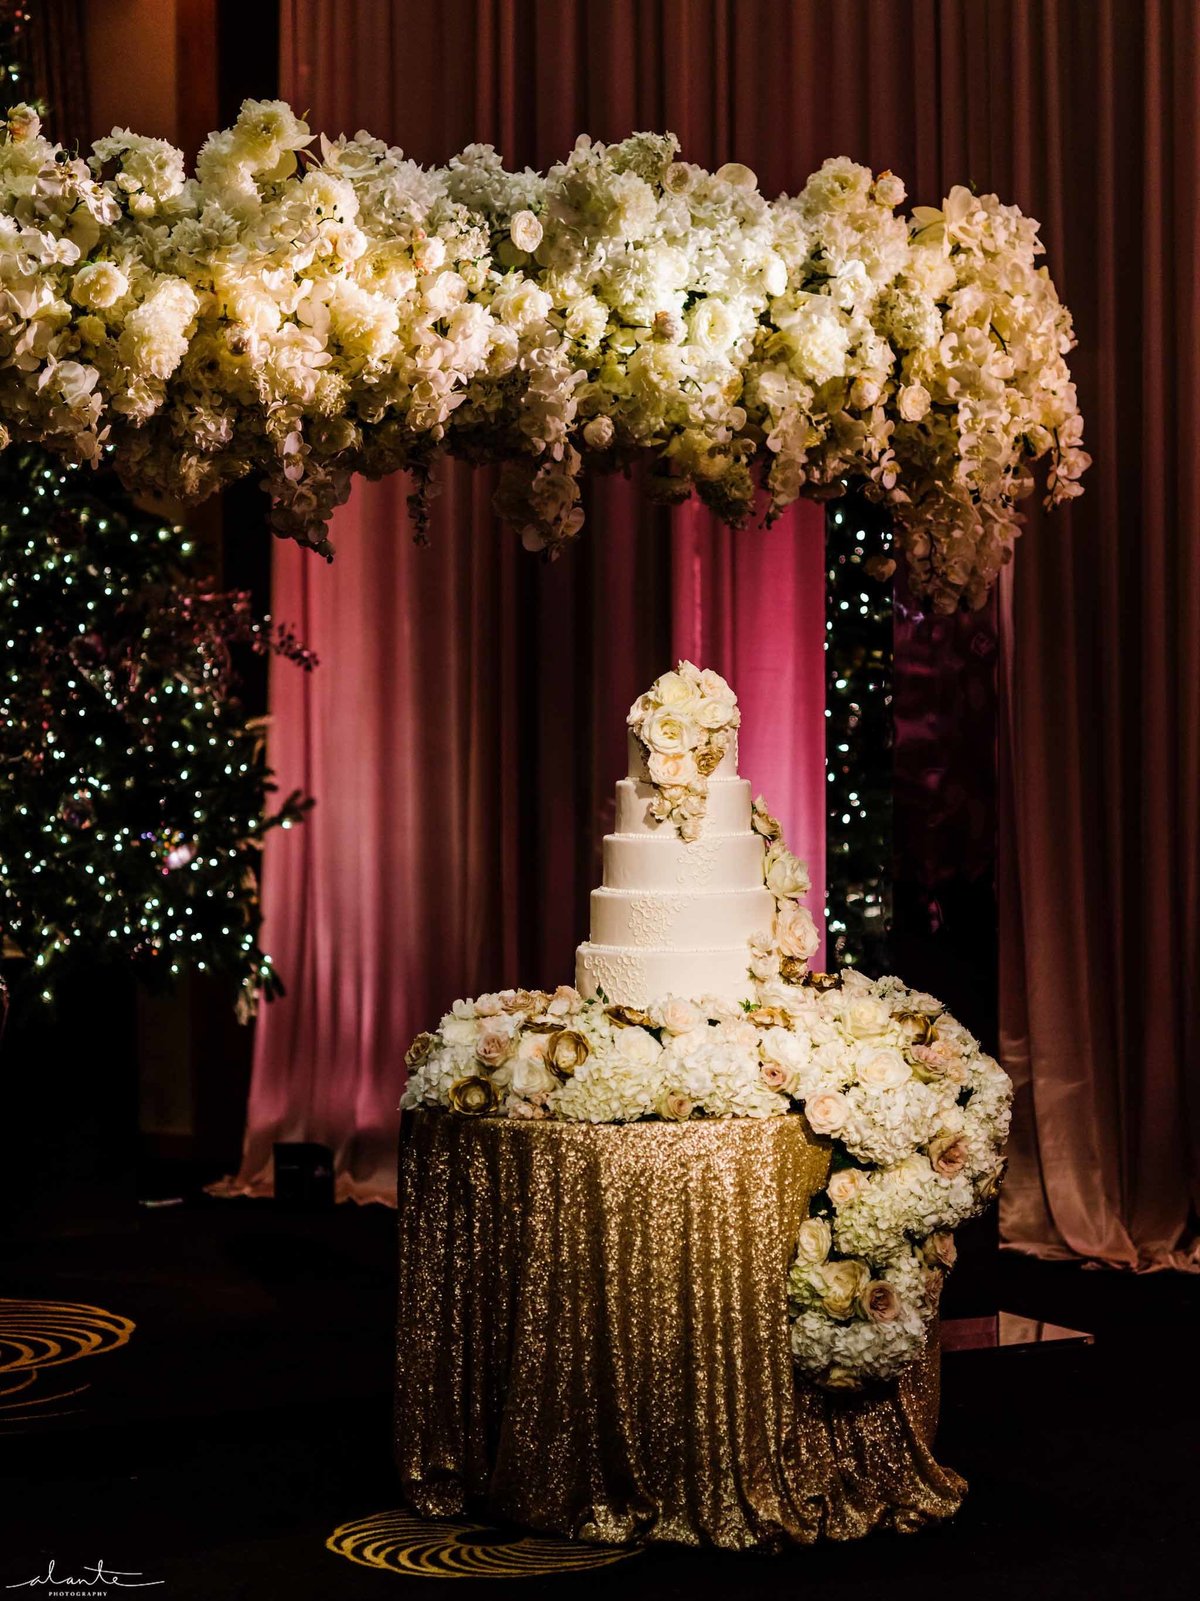 Wedding cake surrounded by white floral cascading over the cake table.